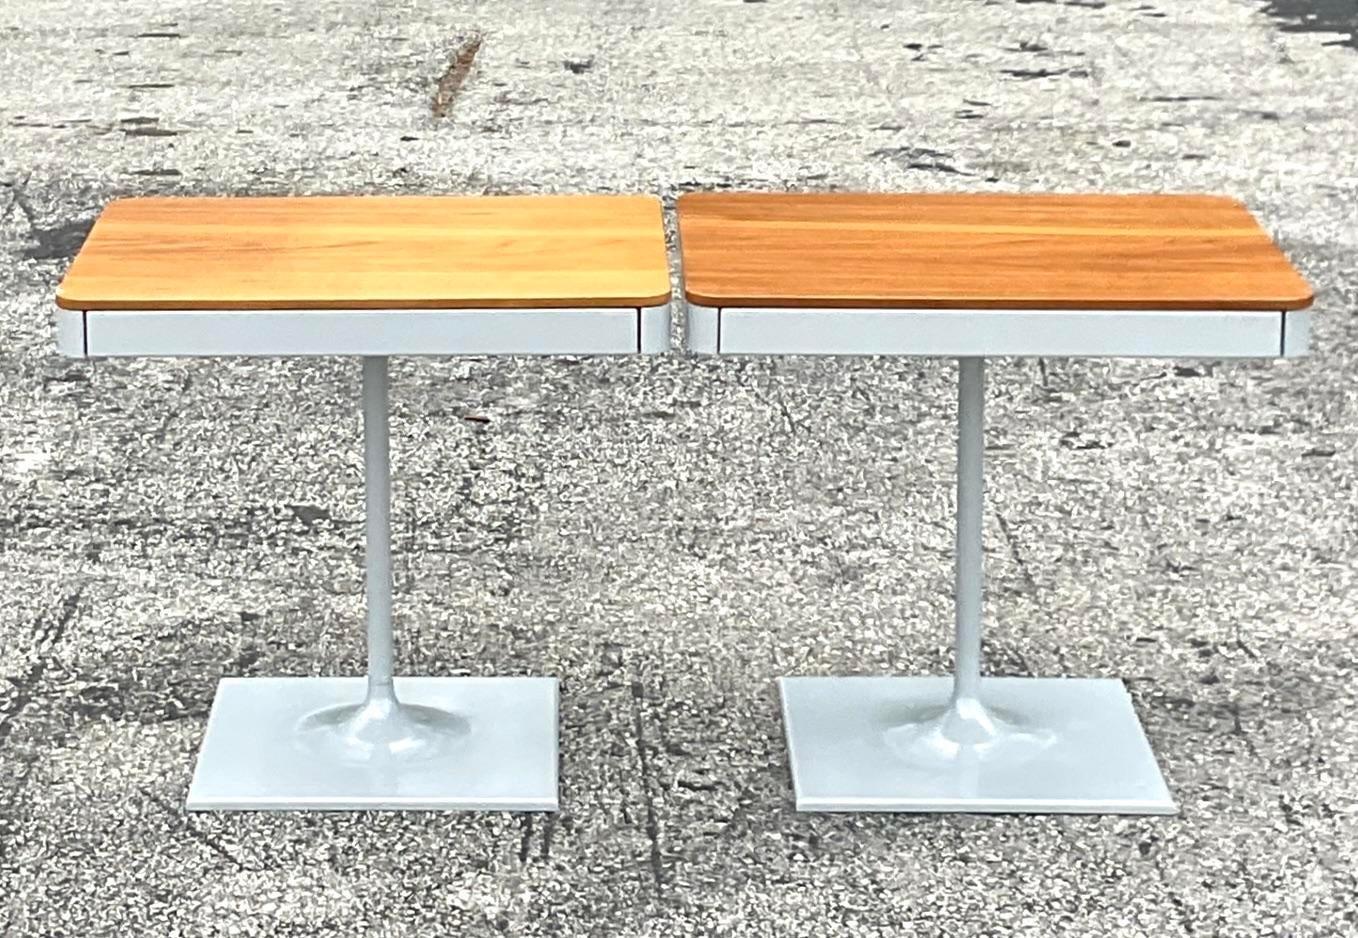 A fabulous pair of vintage Contemporary nightstands. Done in the manner of thr Design z within Reach group. The Min a pedestal nightstands. Acquired from a Palm Beach estate.